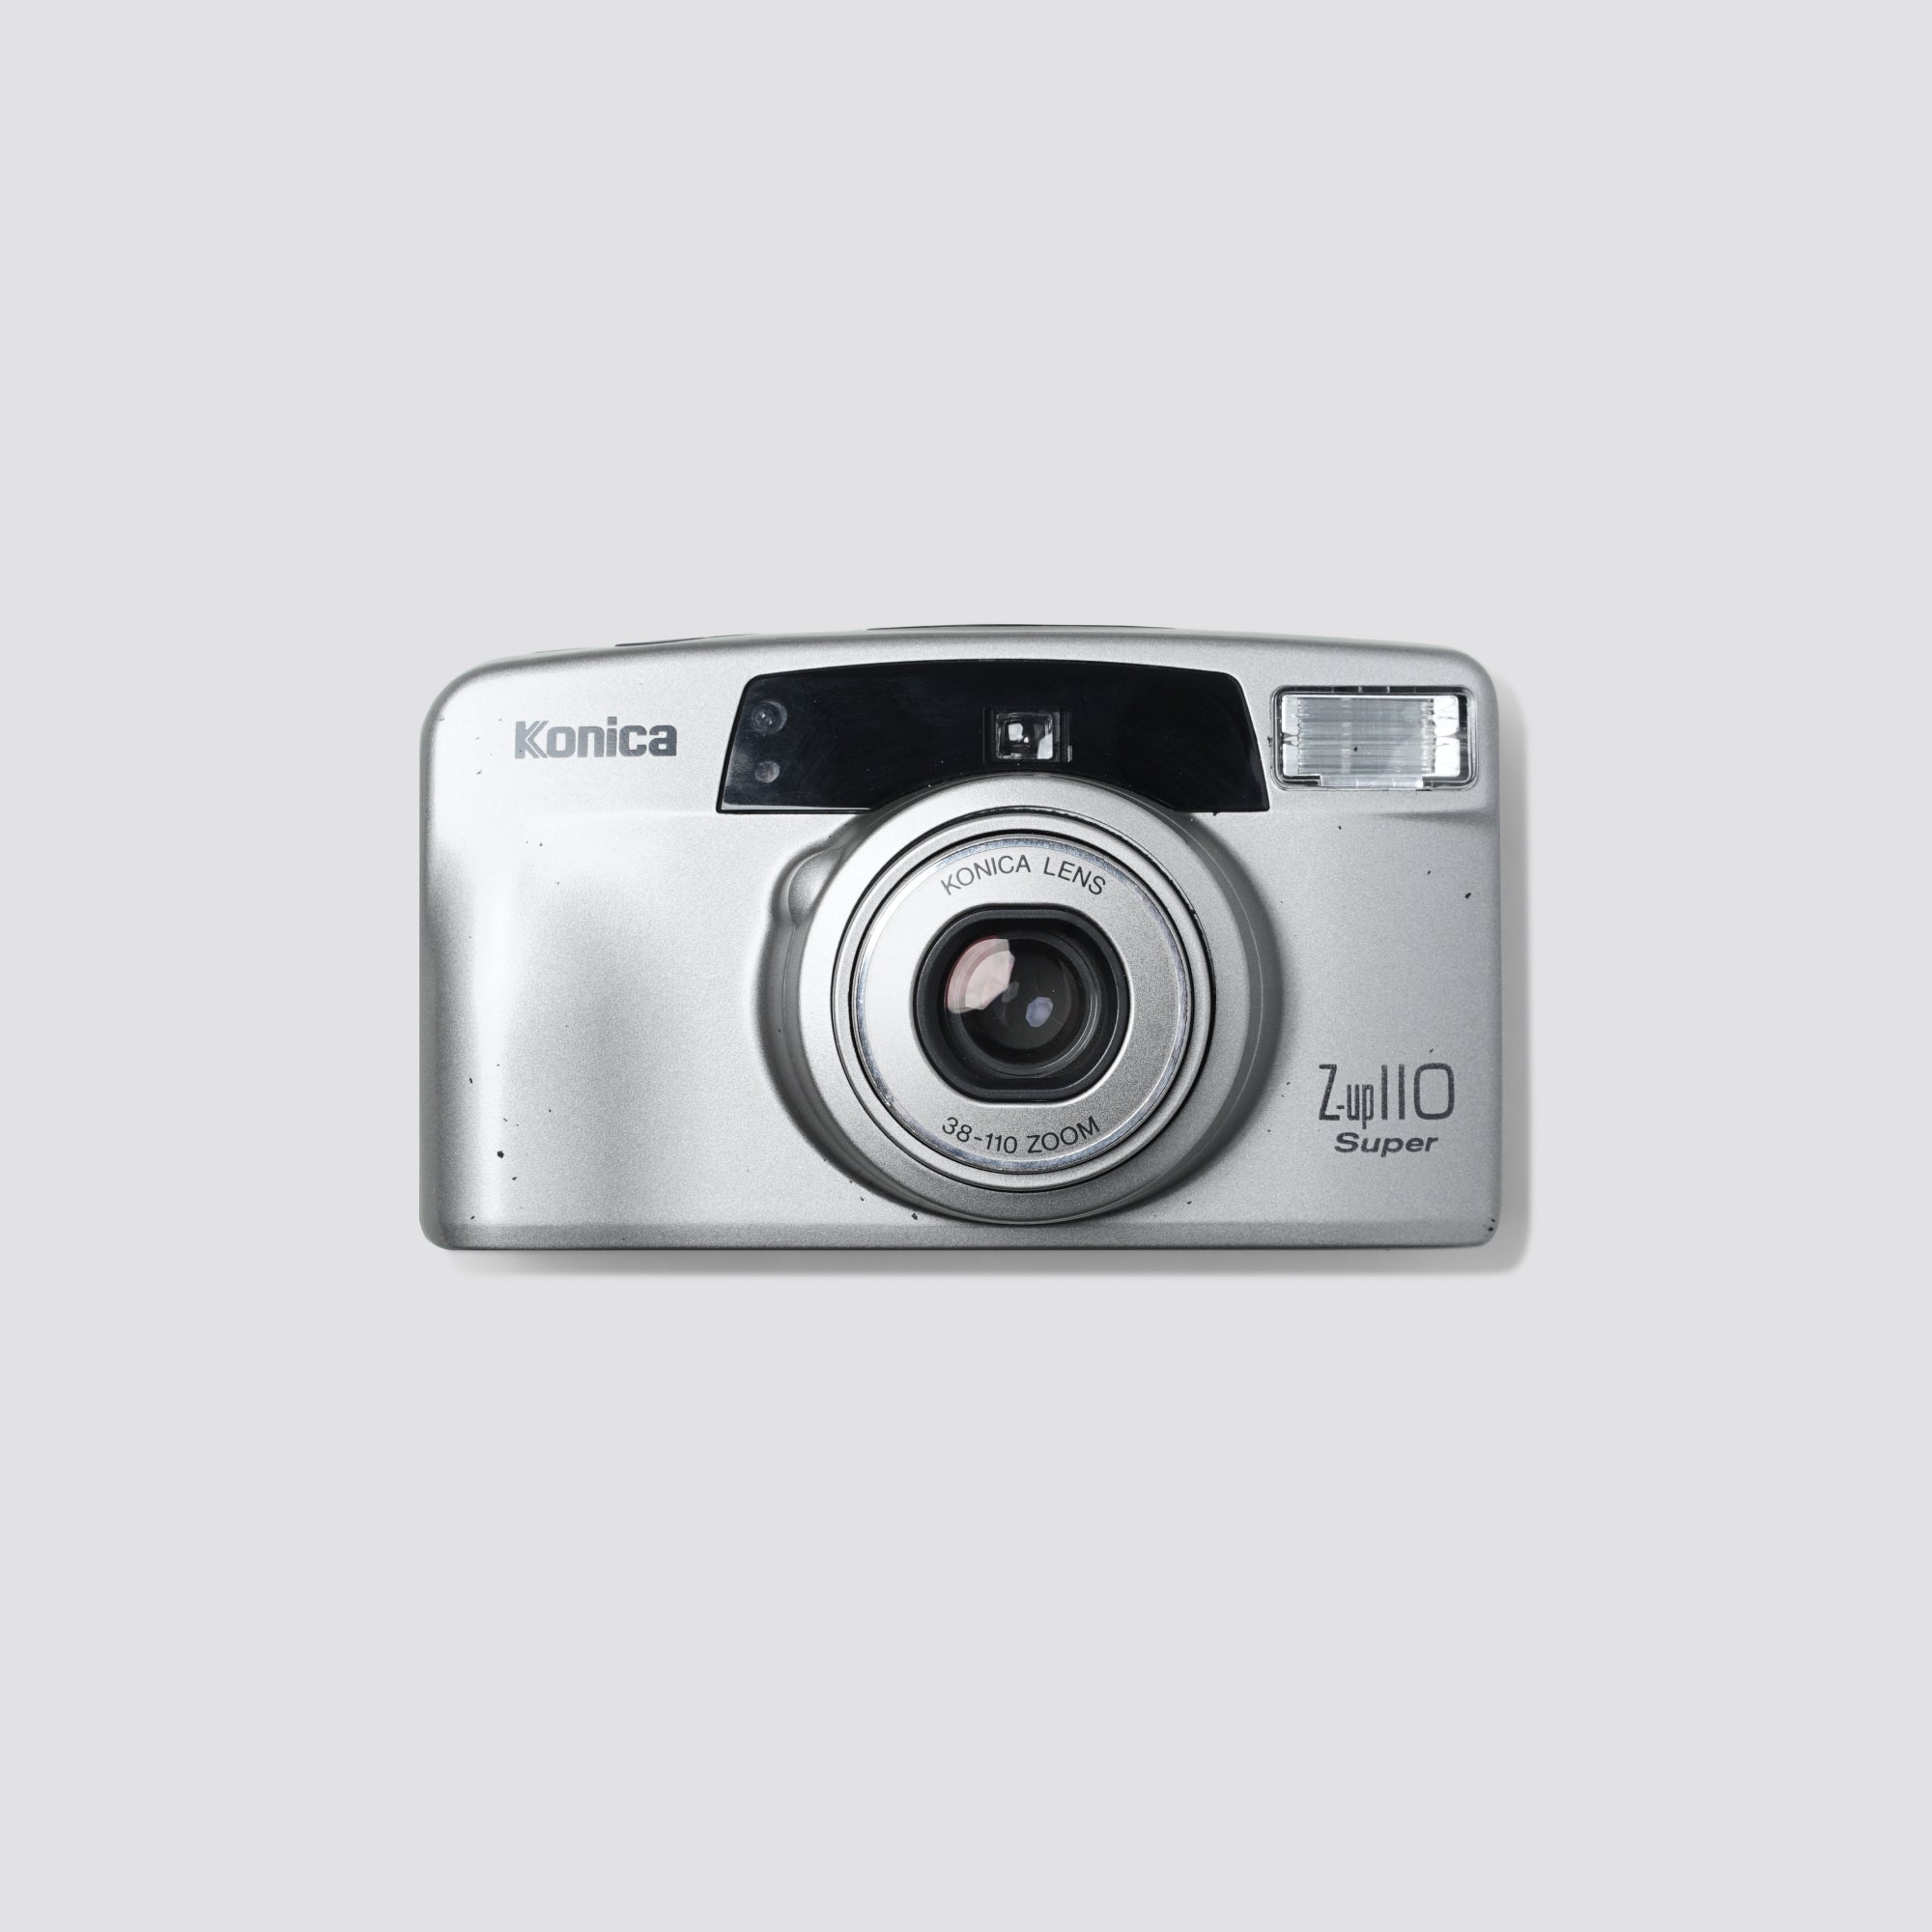 Buy Konica Z-up 110 Super now at Analogue Amsterdam